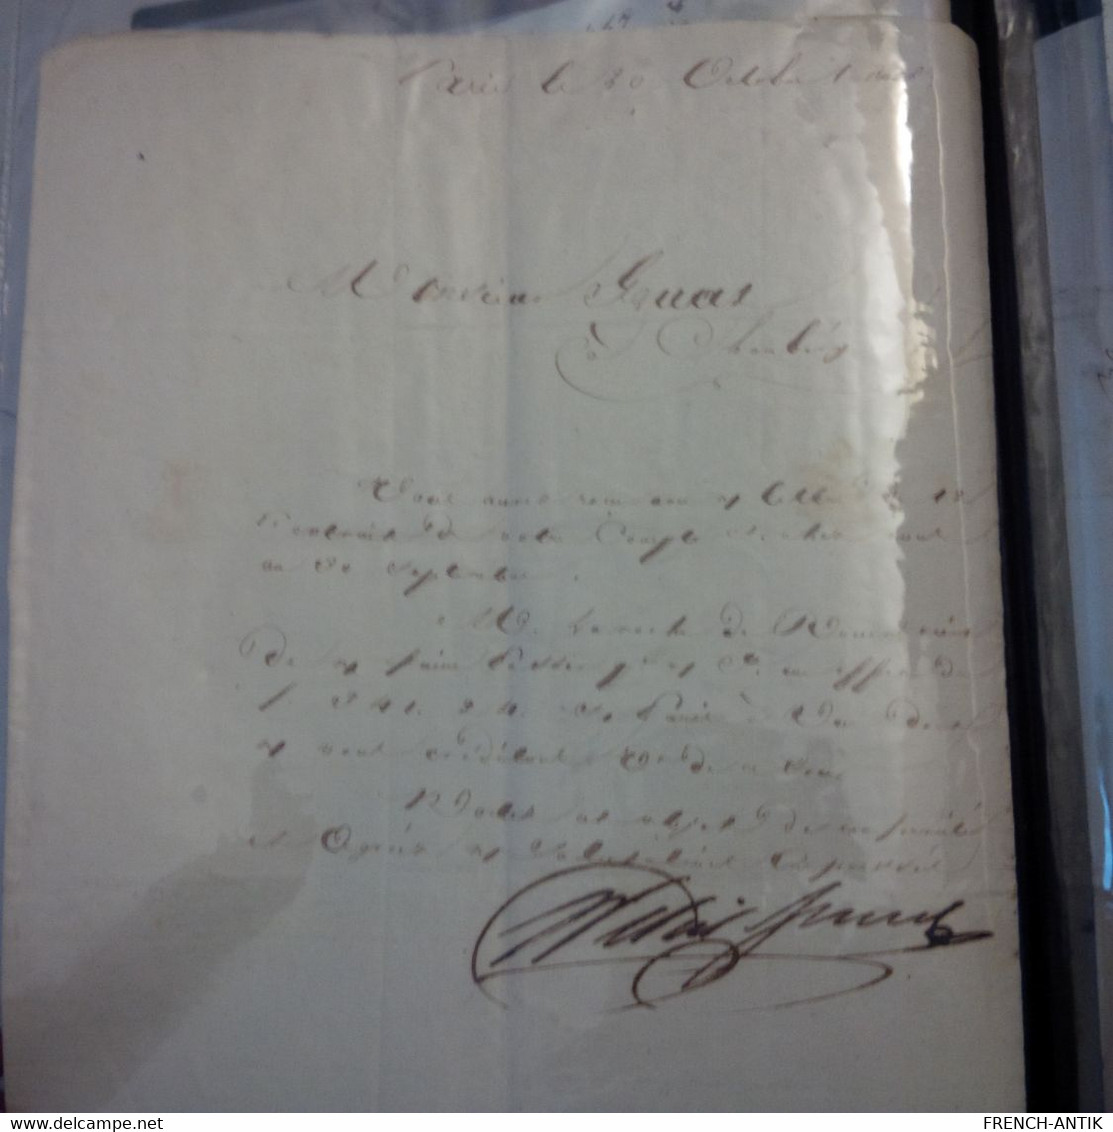 LOT 15 LETTRE POUR CHAMBERY DONT KOENIGSBERG PRUSSE MILITARIA FAMILLE GRUAT ET FOREST COLONEL 1810 1870